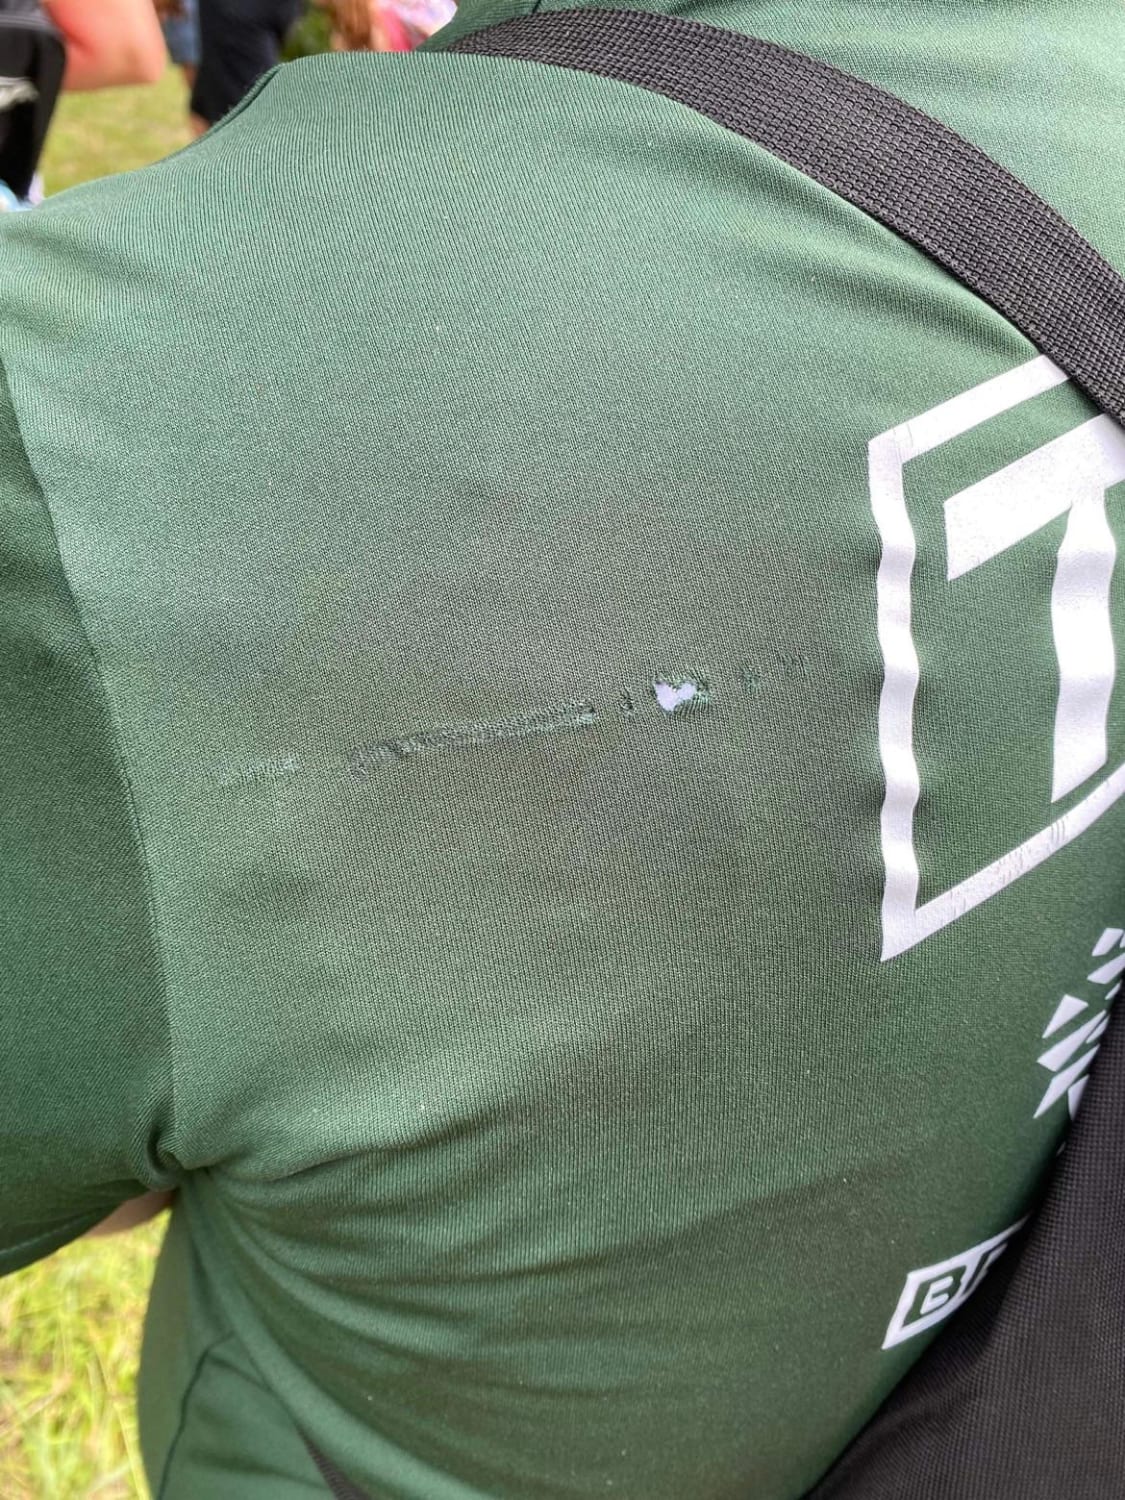 Ricky’s drive on 10 yesterday grazed my shoulder and left a skid mark on my shirt.